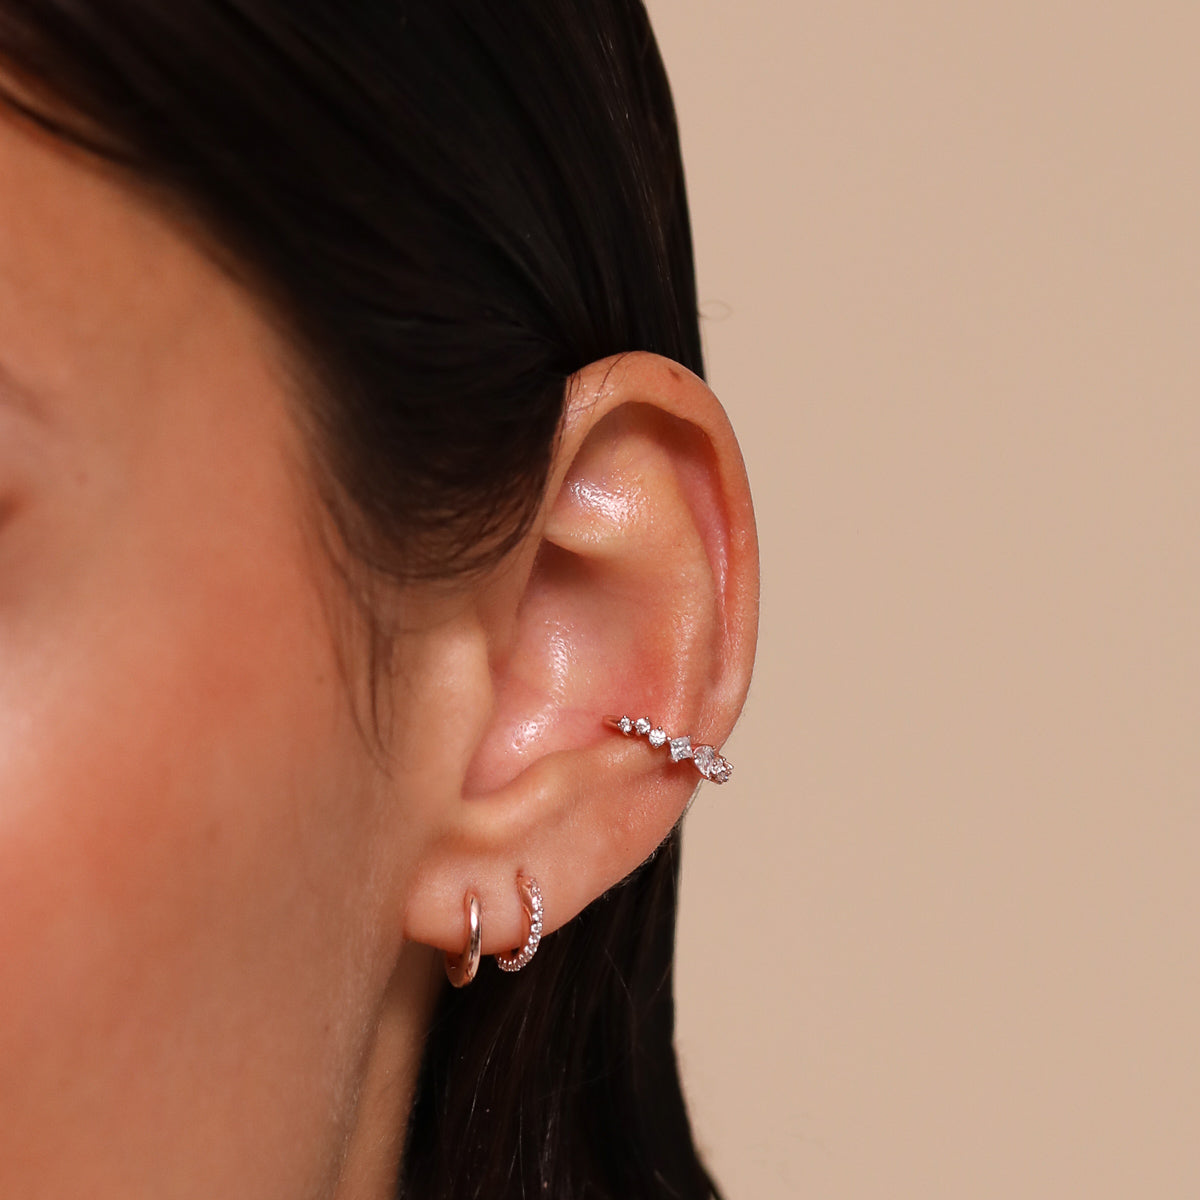 Orbit Crystal Huggies in Rose Gold worn stacked with other earrings